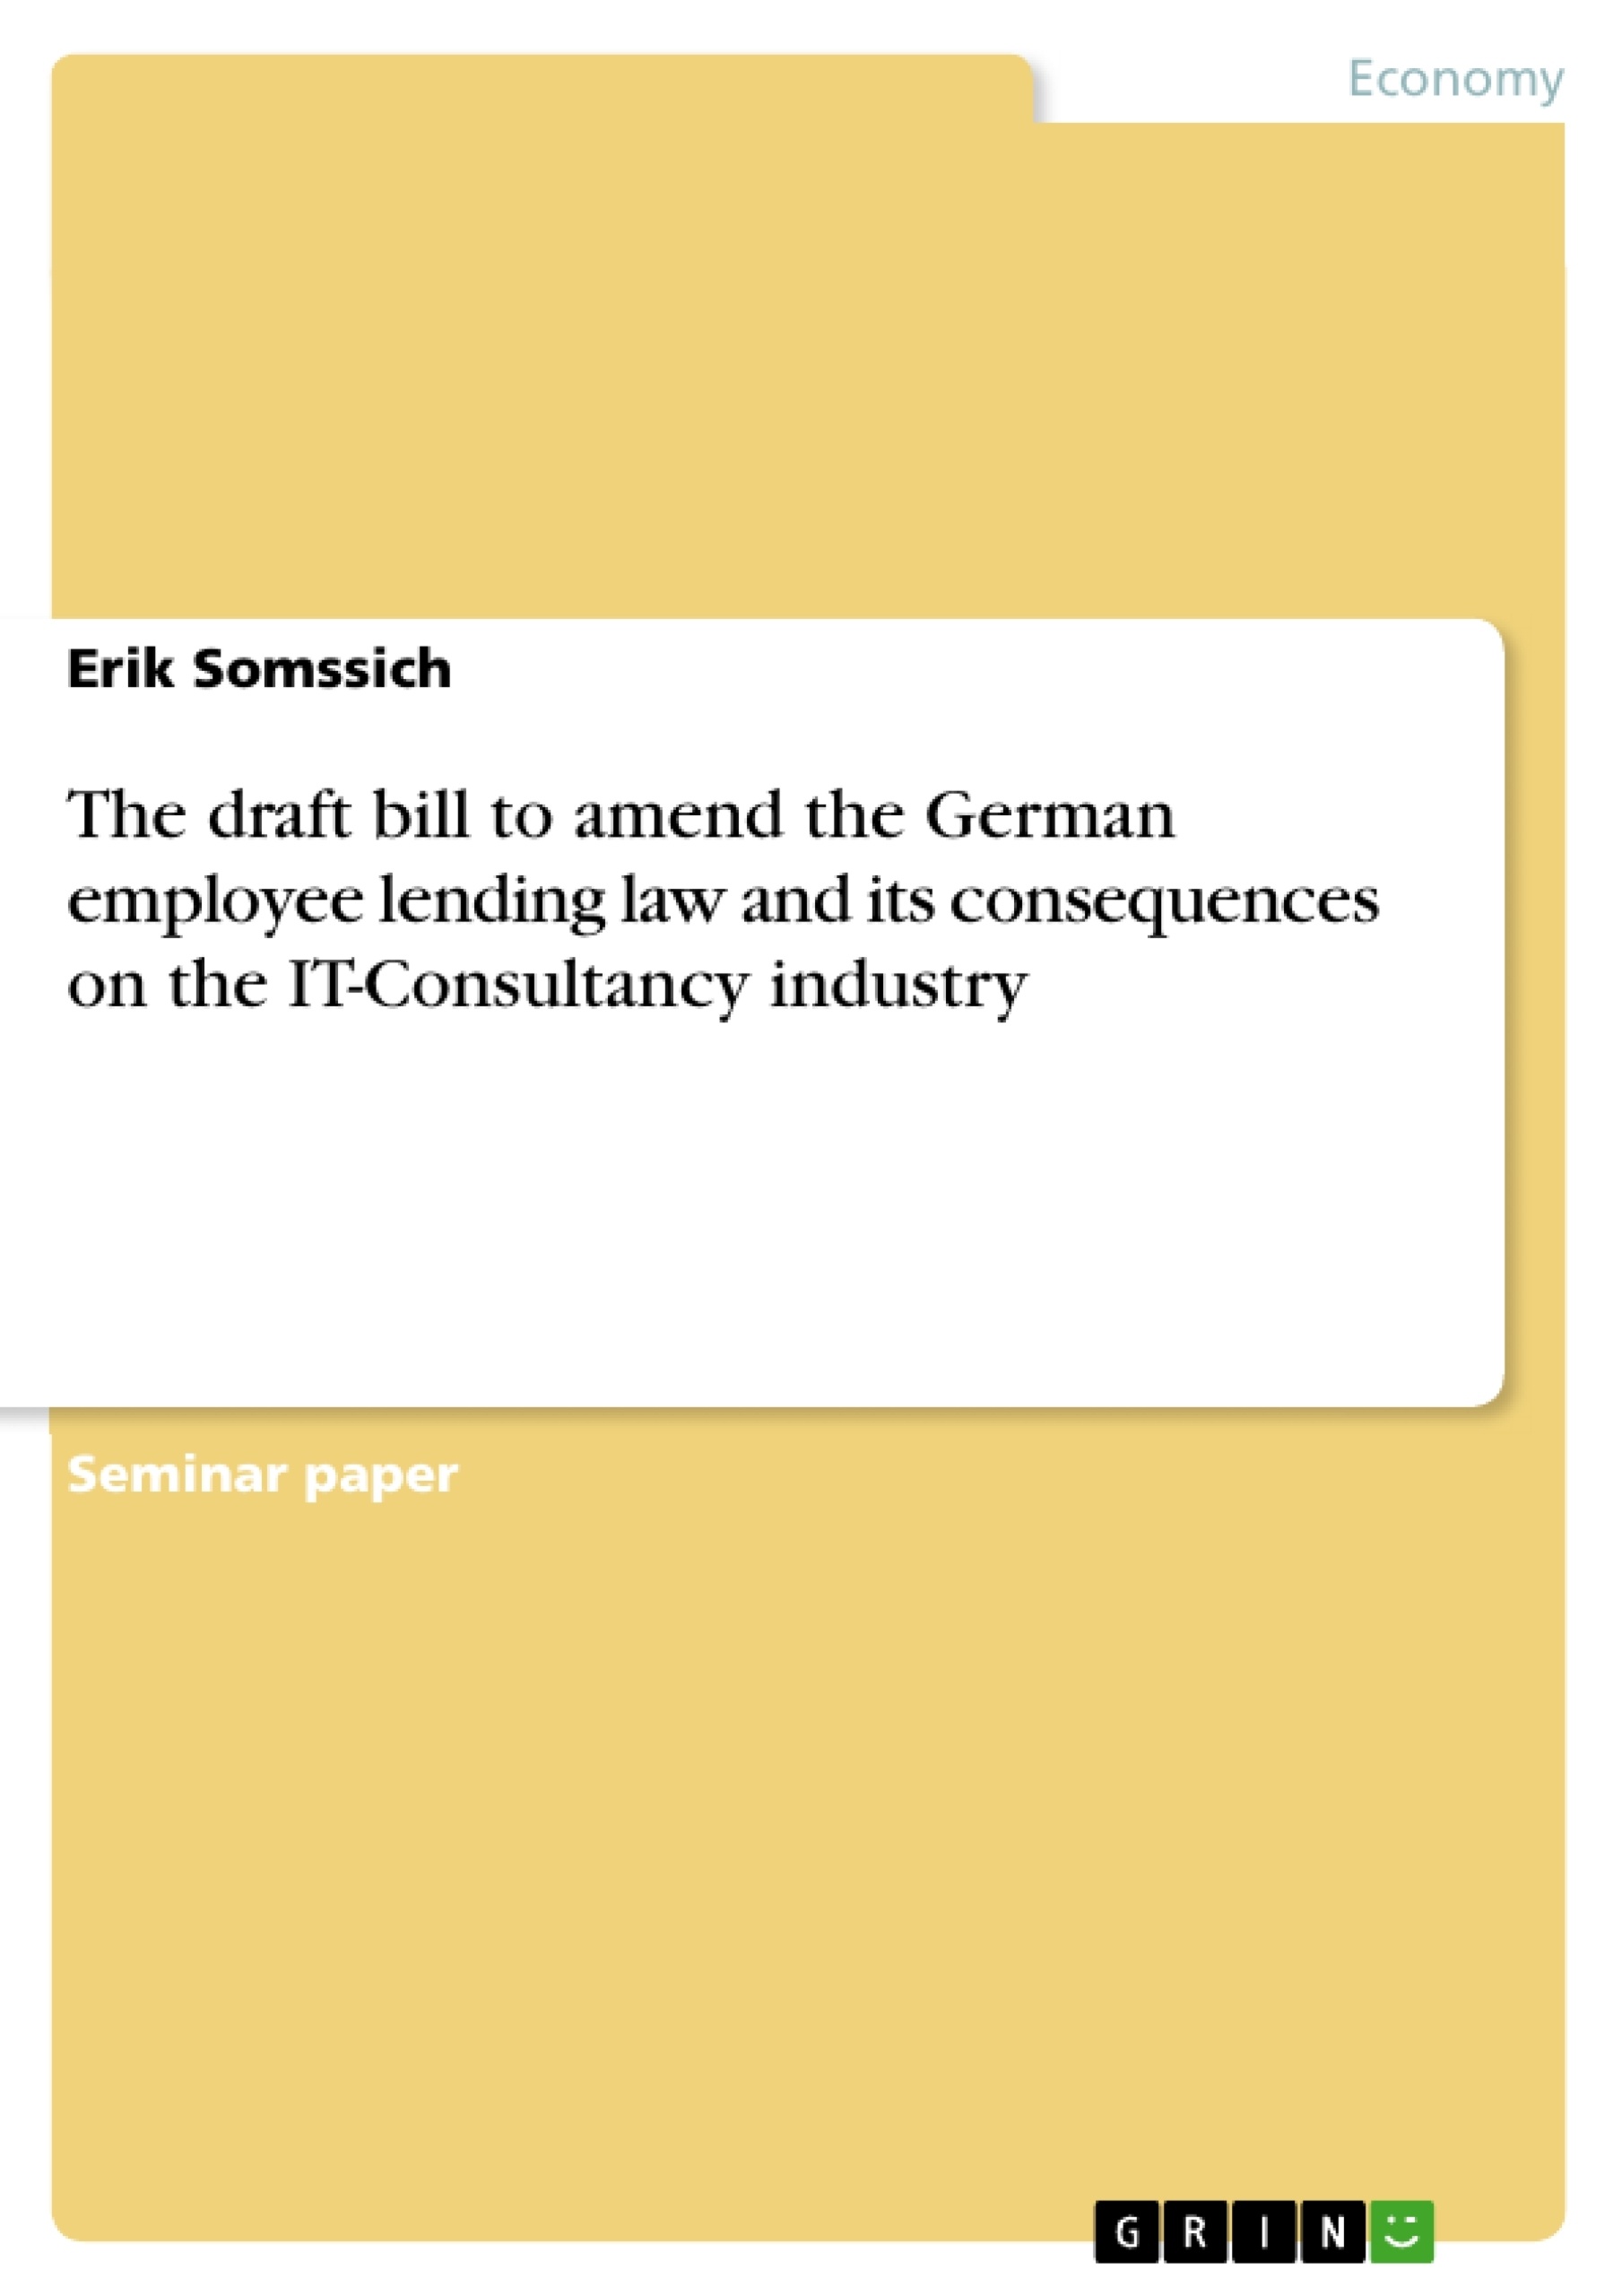 Titre: The draft bill to amend the German employee lending law and its consequences on the IT-Consultancy industry